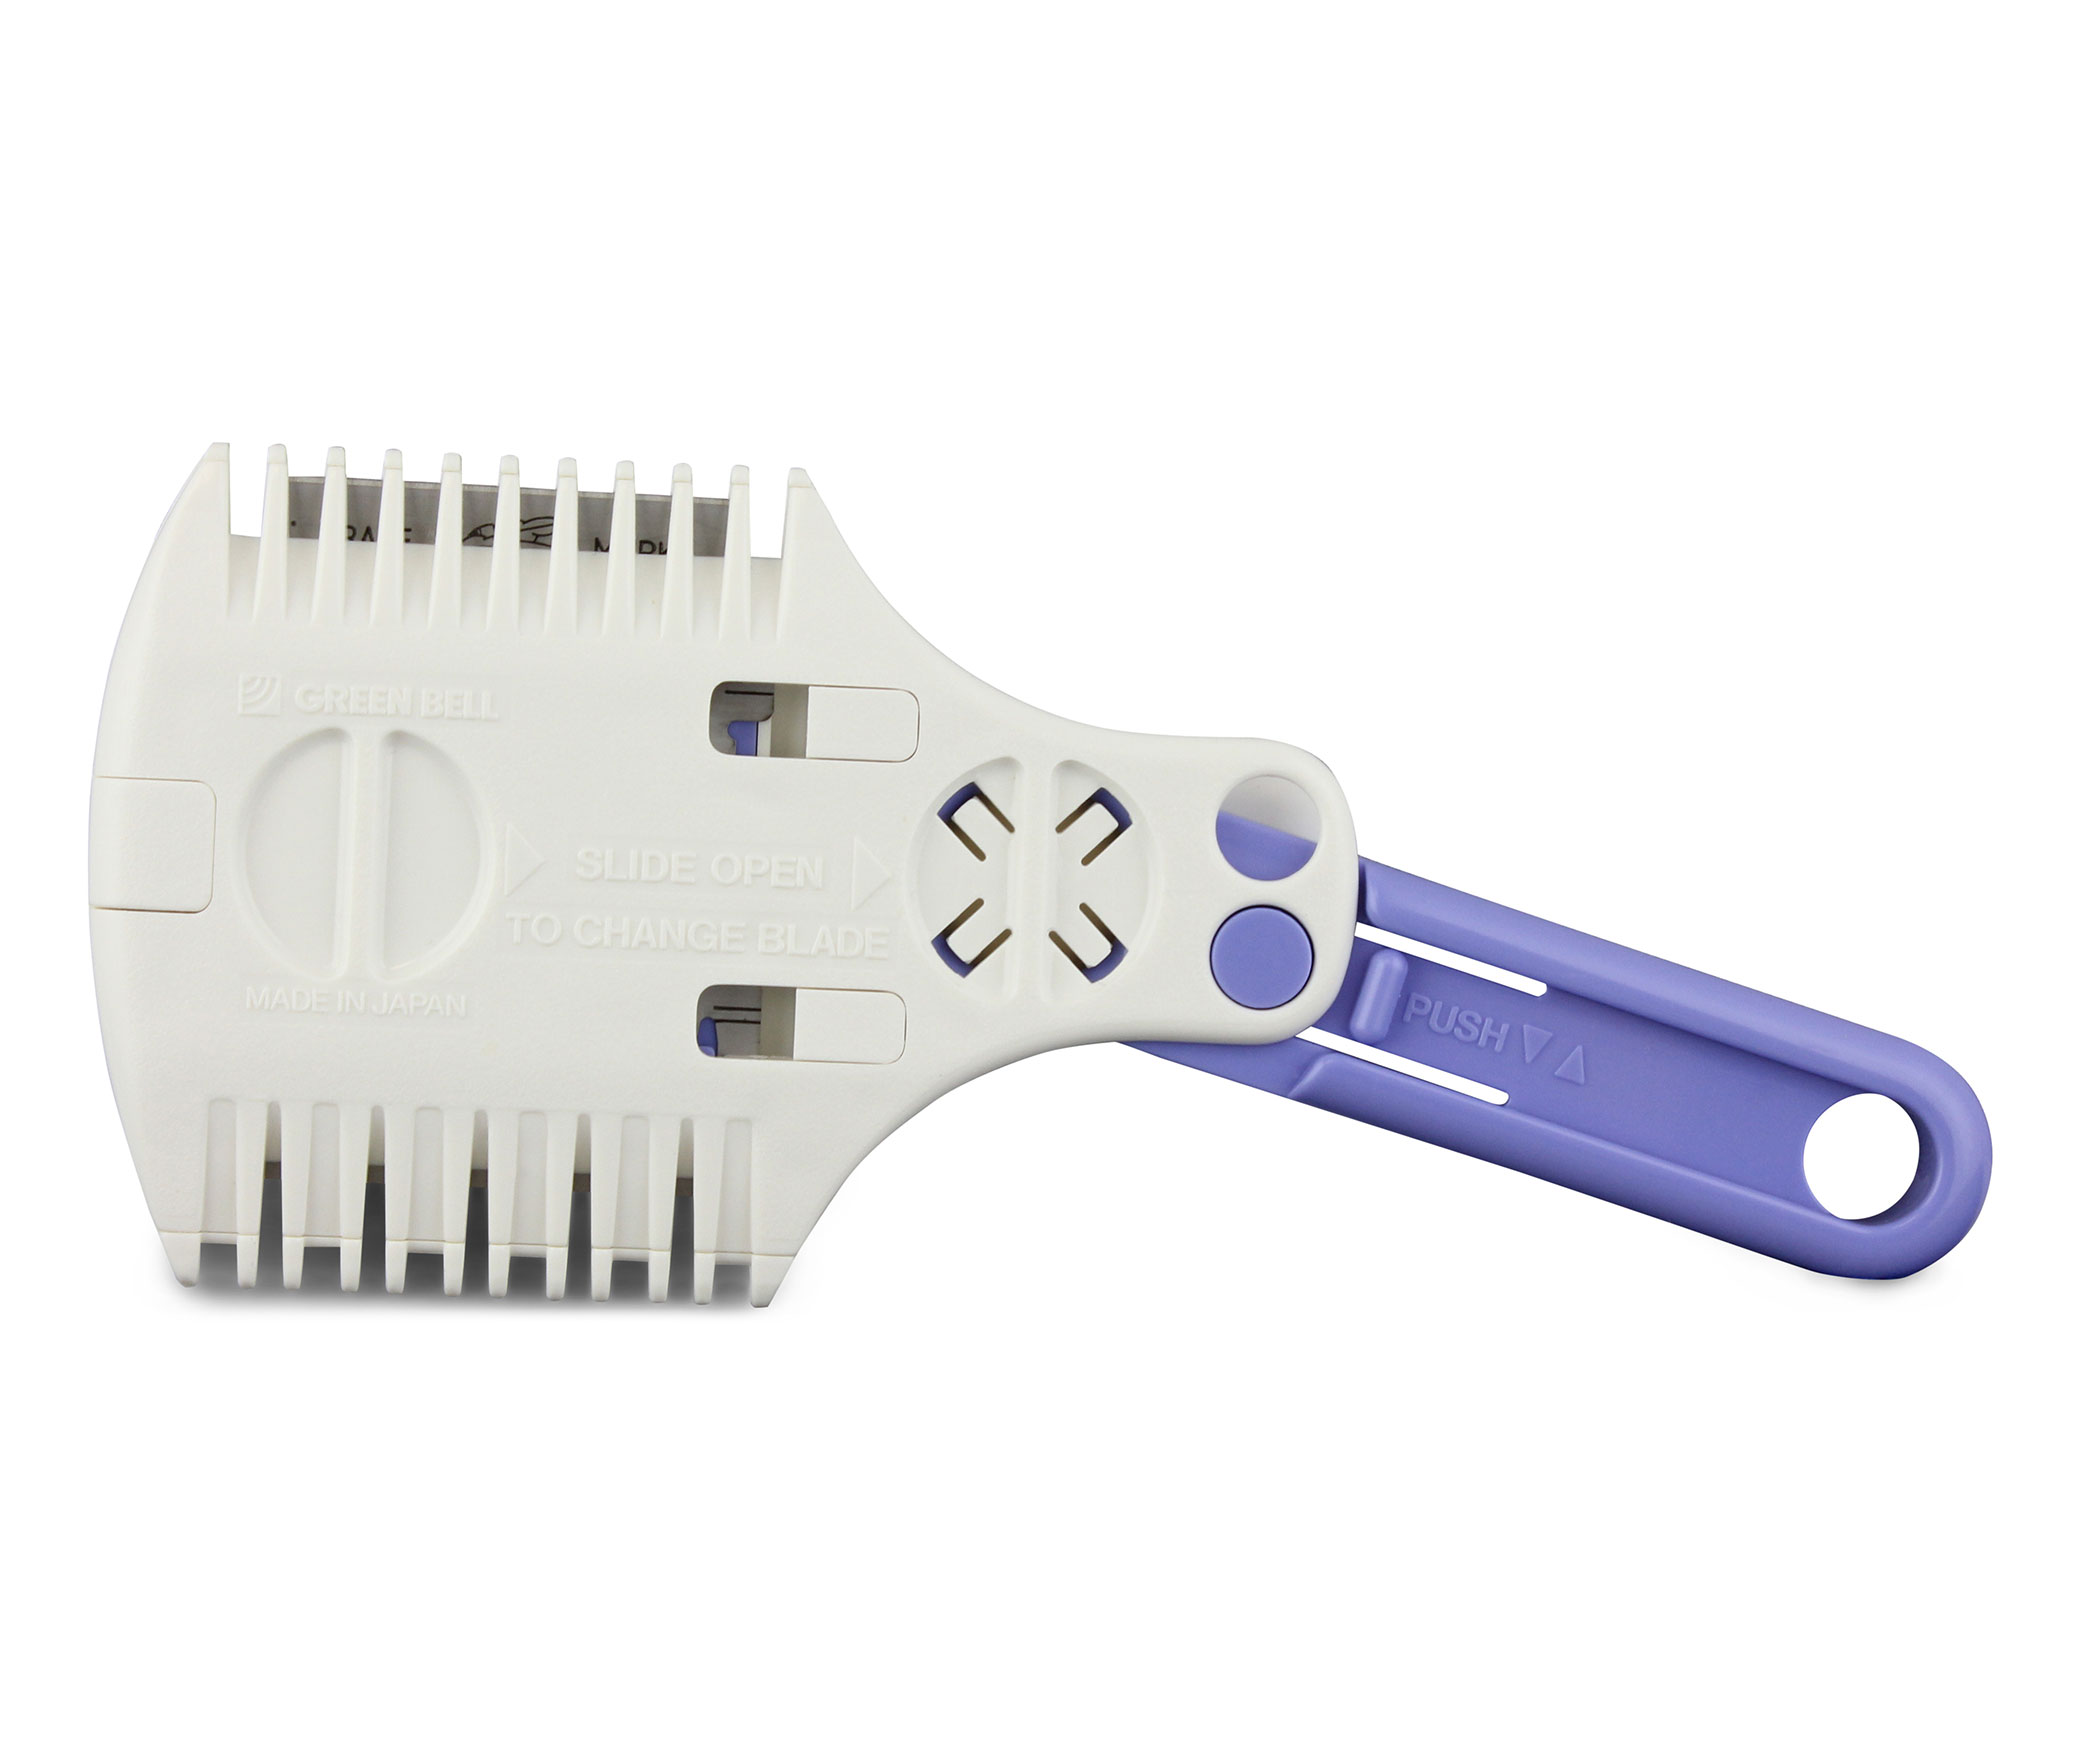 Seki Edge Haircutting Styling Razor (SS-702) right or left handed user